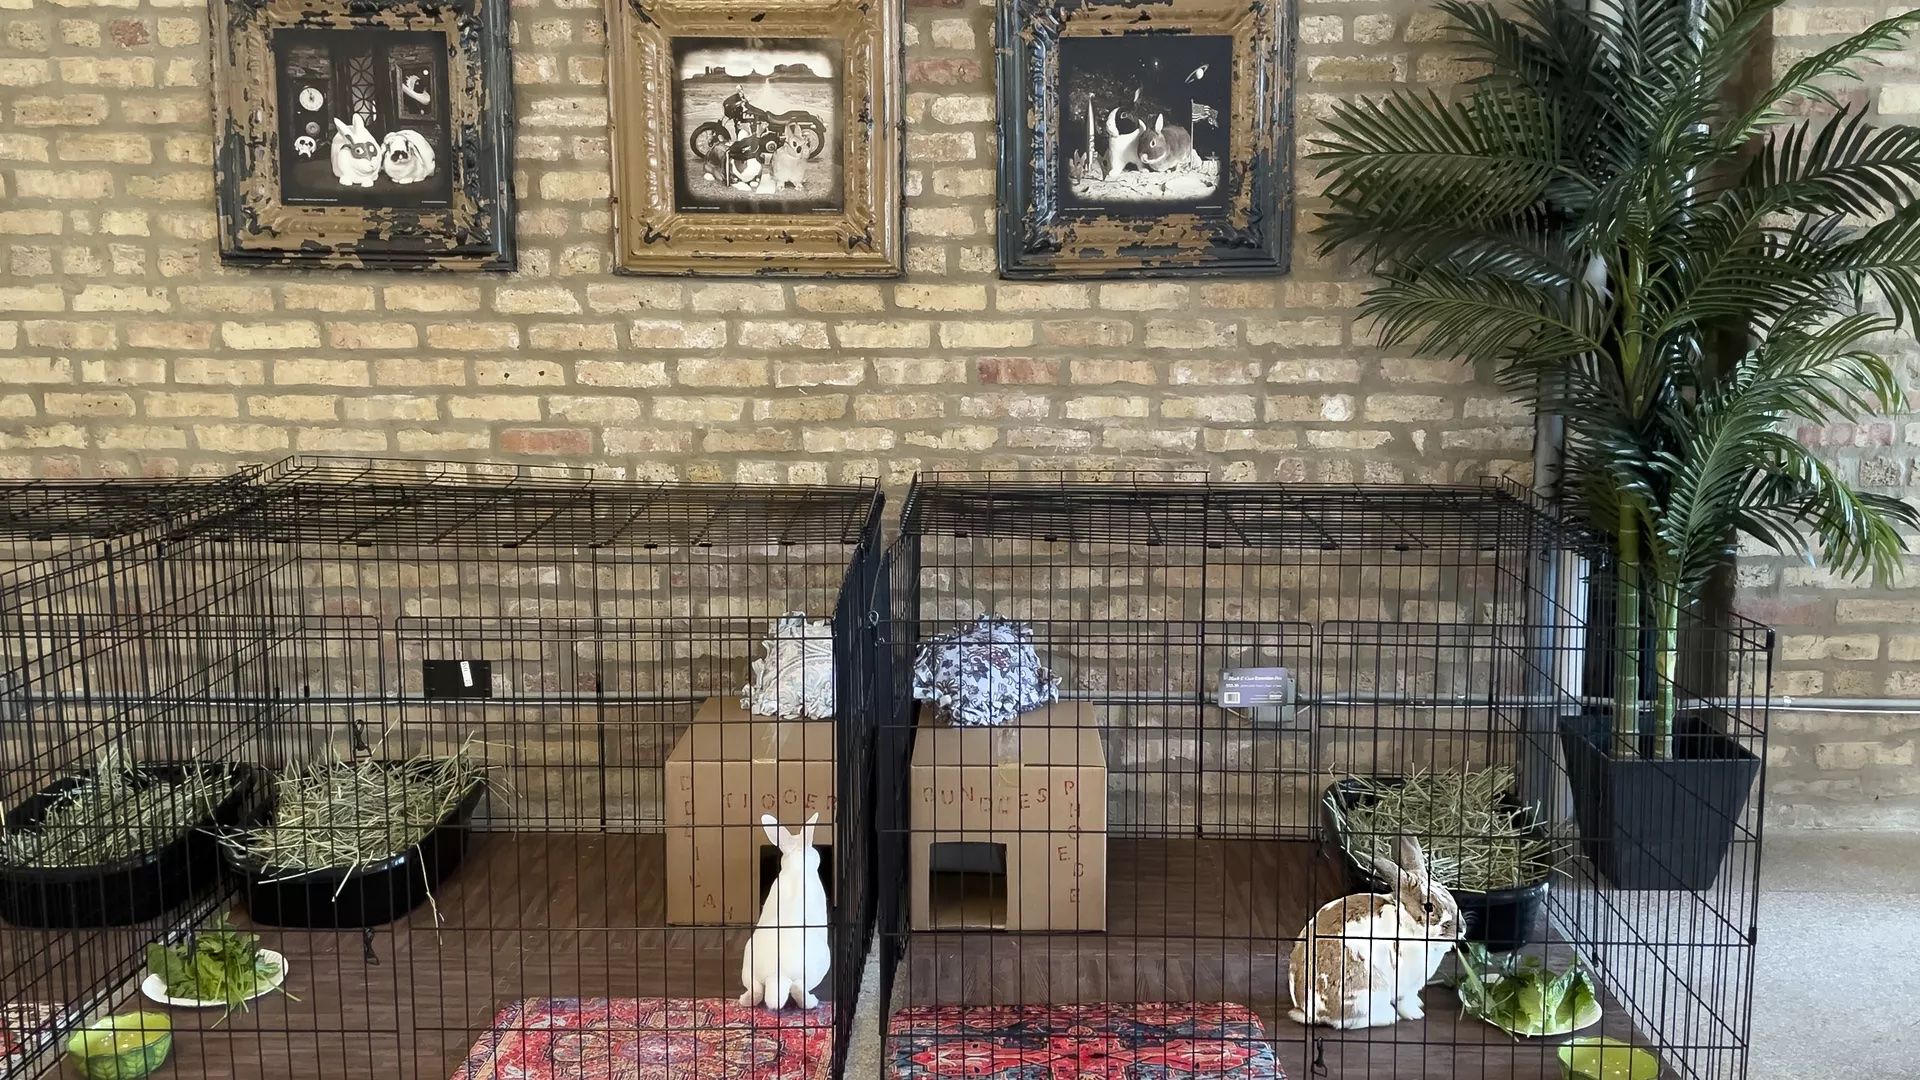 Cages with rabbits in them that are meant as 